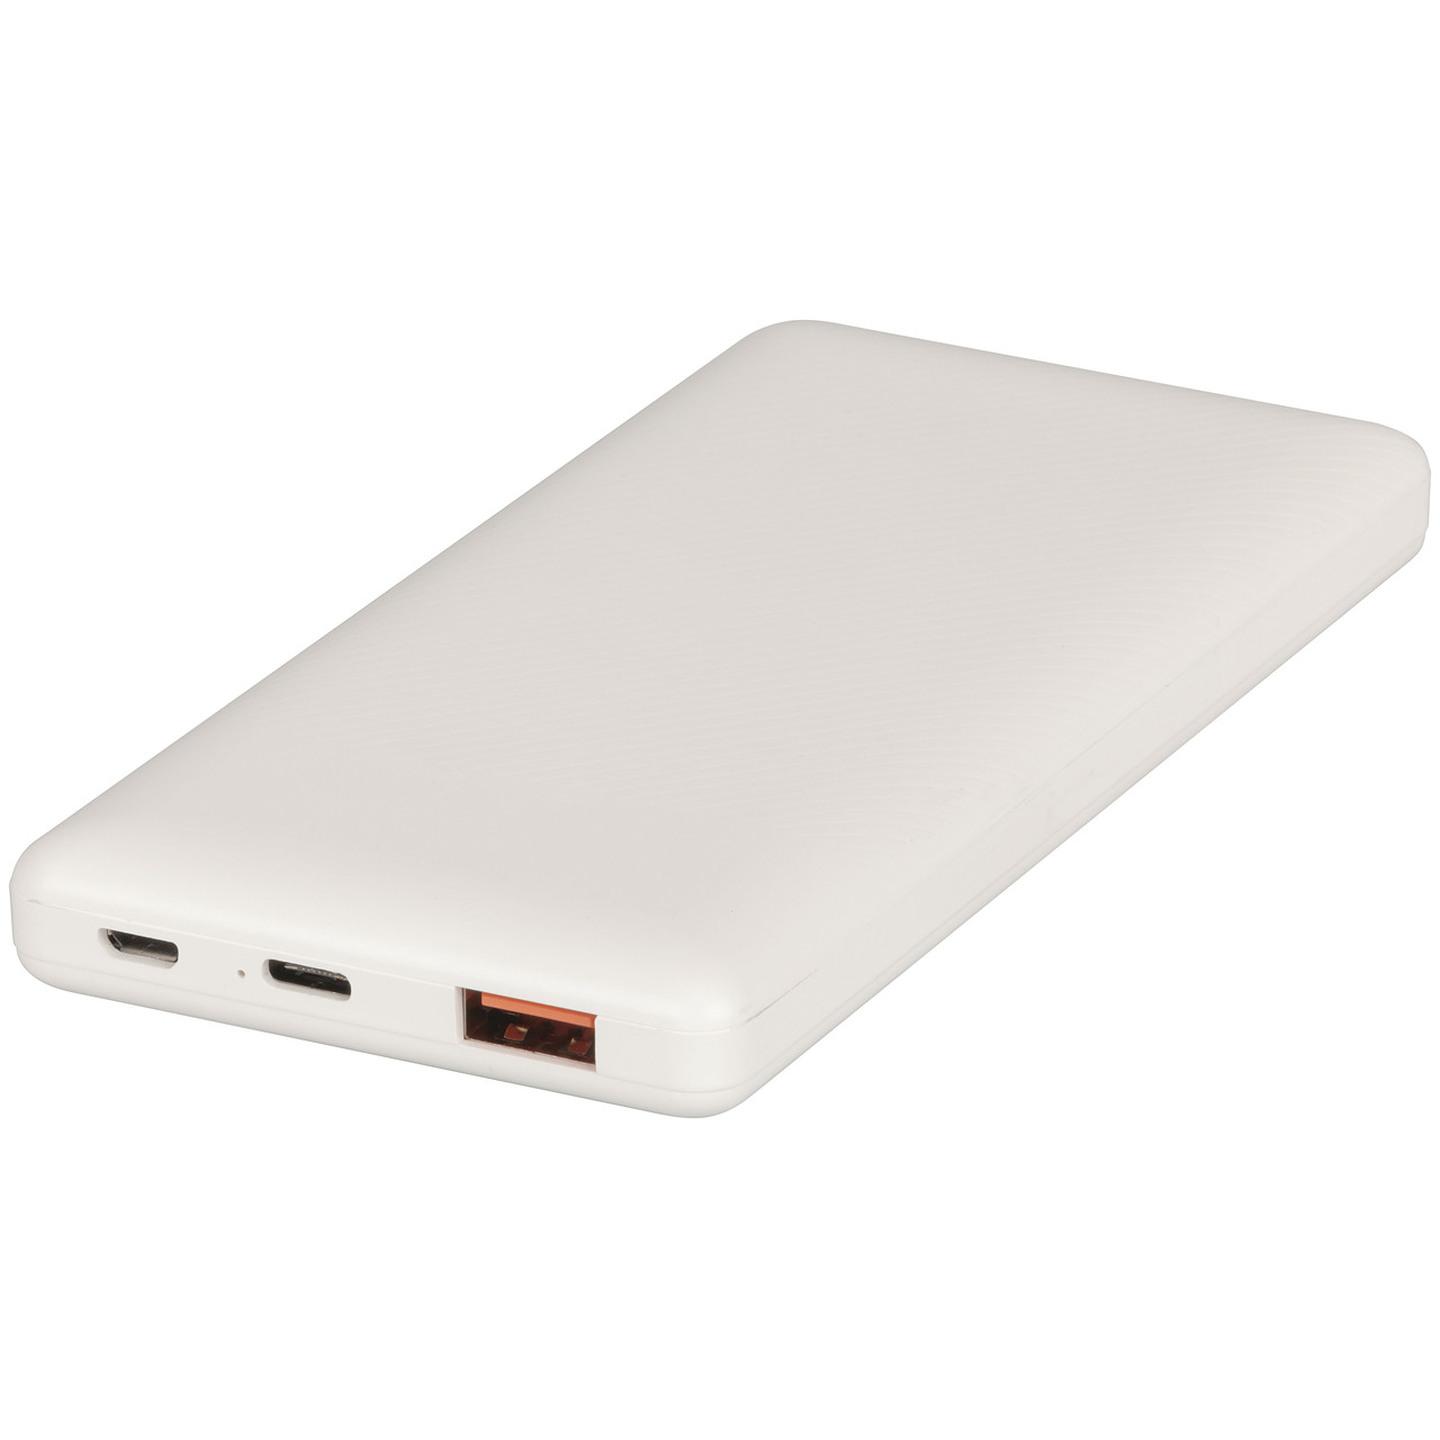 10000mAh Power Bank with USB-C PD and USB-A Ports - White